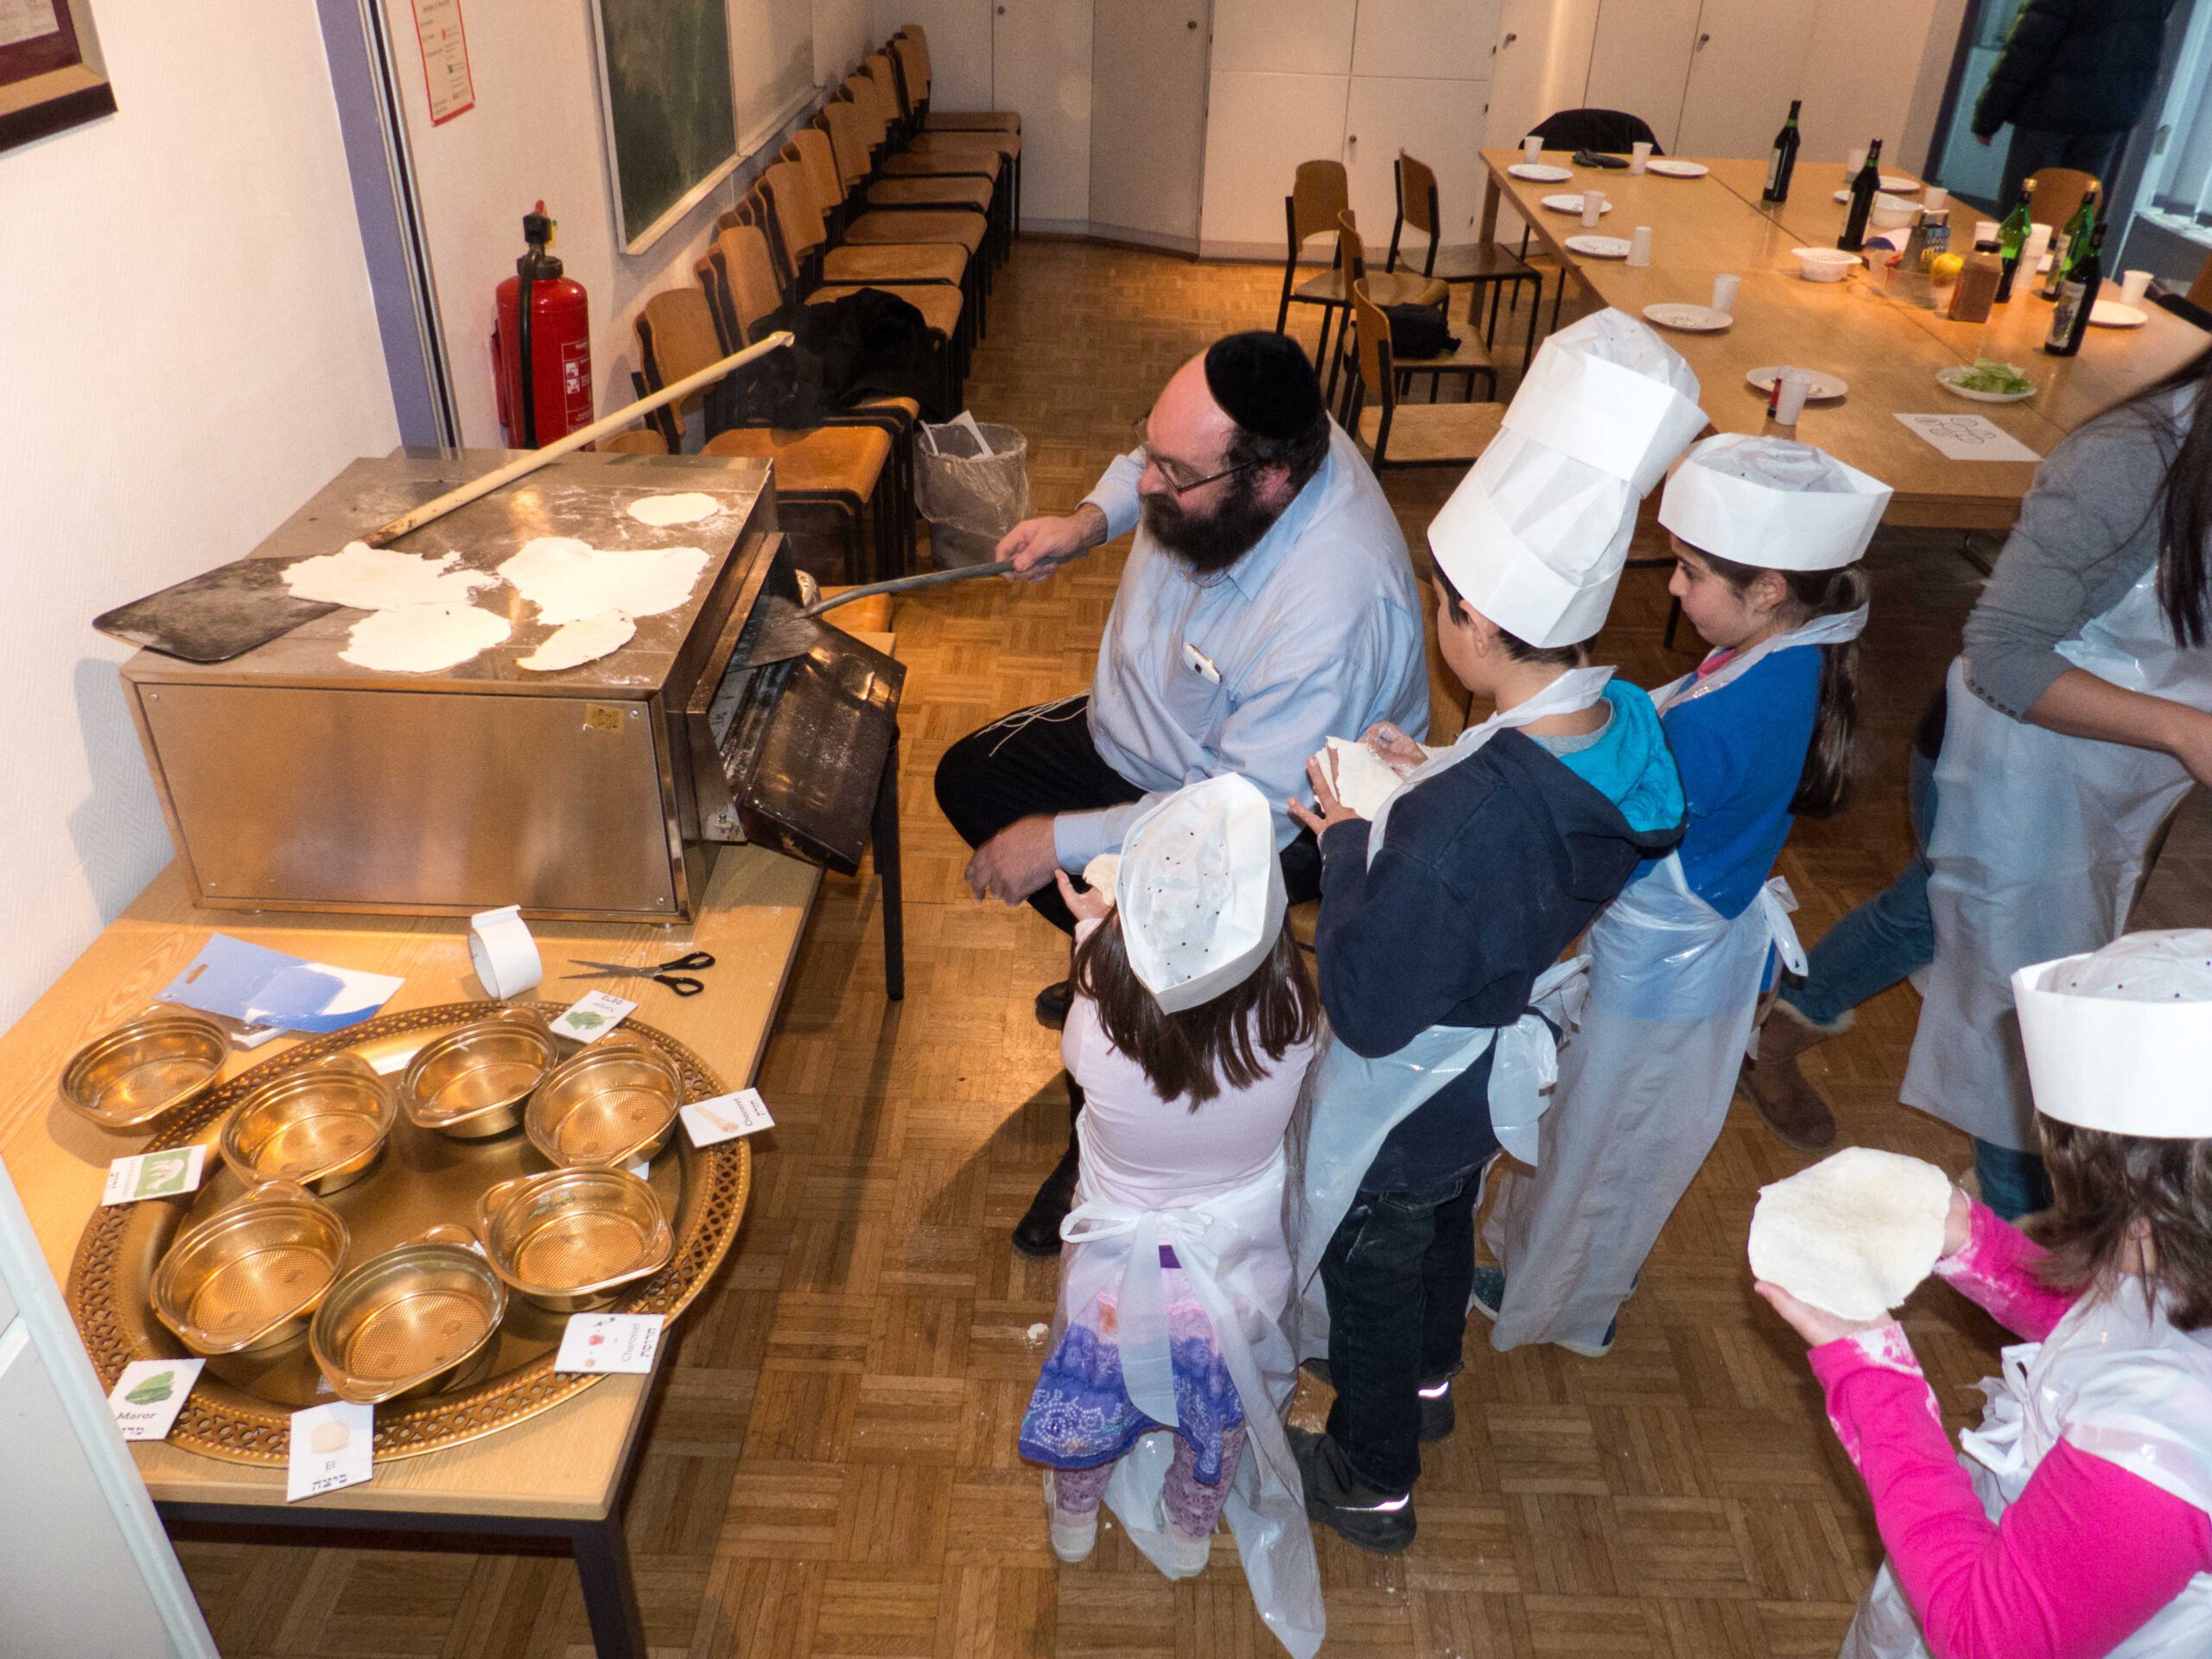 Matzah baking for Passover with the Jewish Community Youth Center at the Wiesbaden Jewish Community. Photographer: Igor Eisenschtat. Collection Jewish Community Wiesbaden